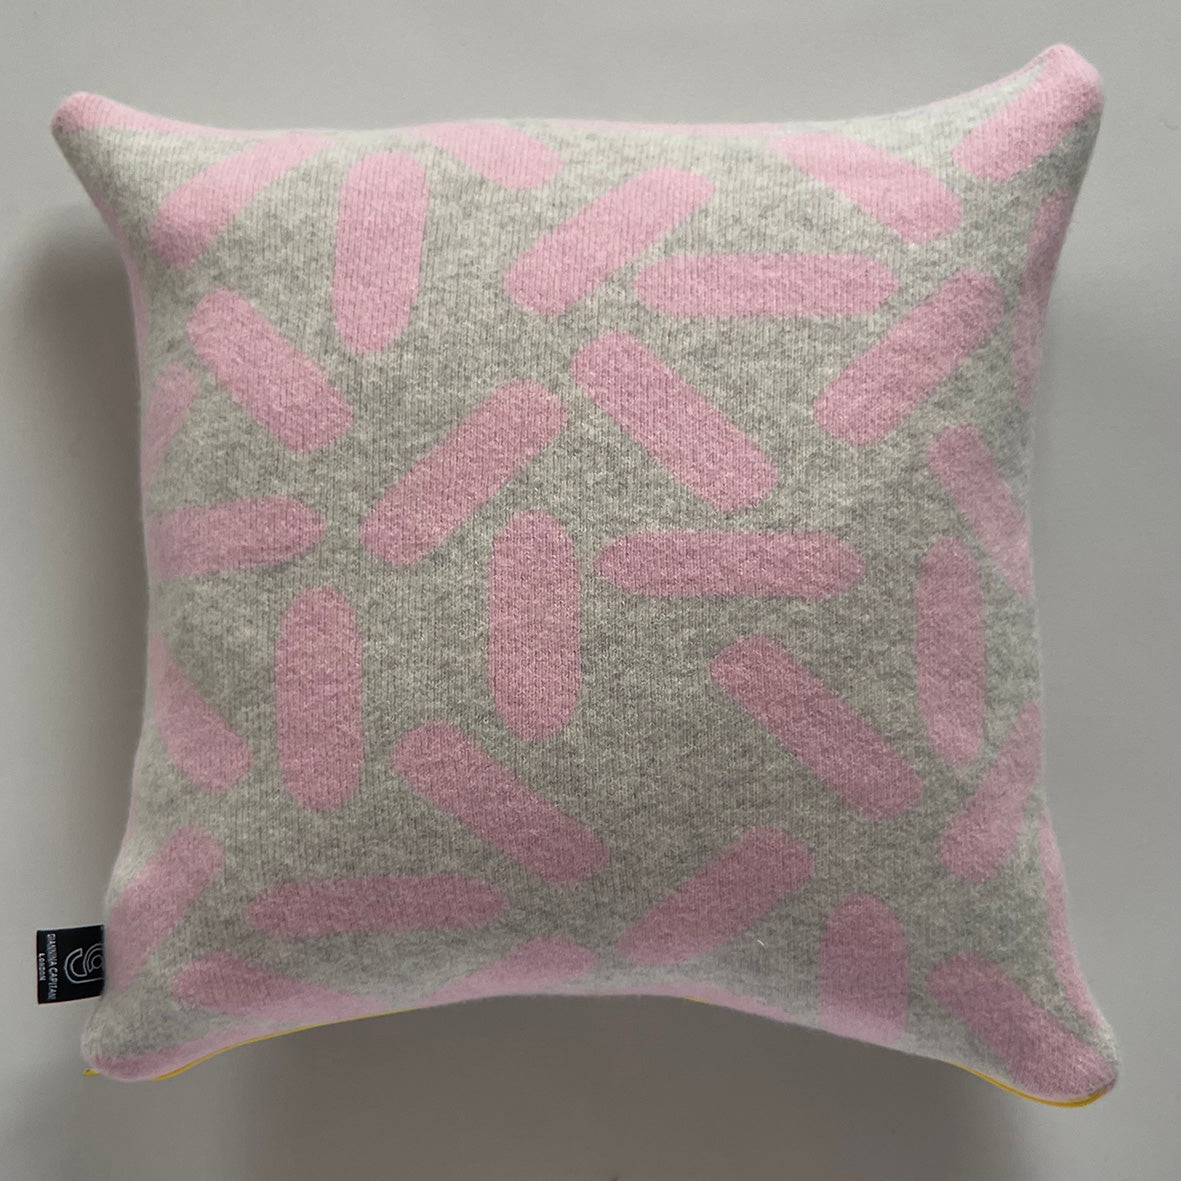 TIC-TAC CUSHION IN GREY AND PINK